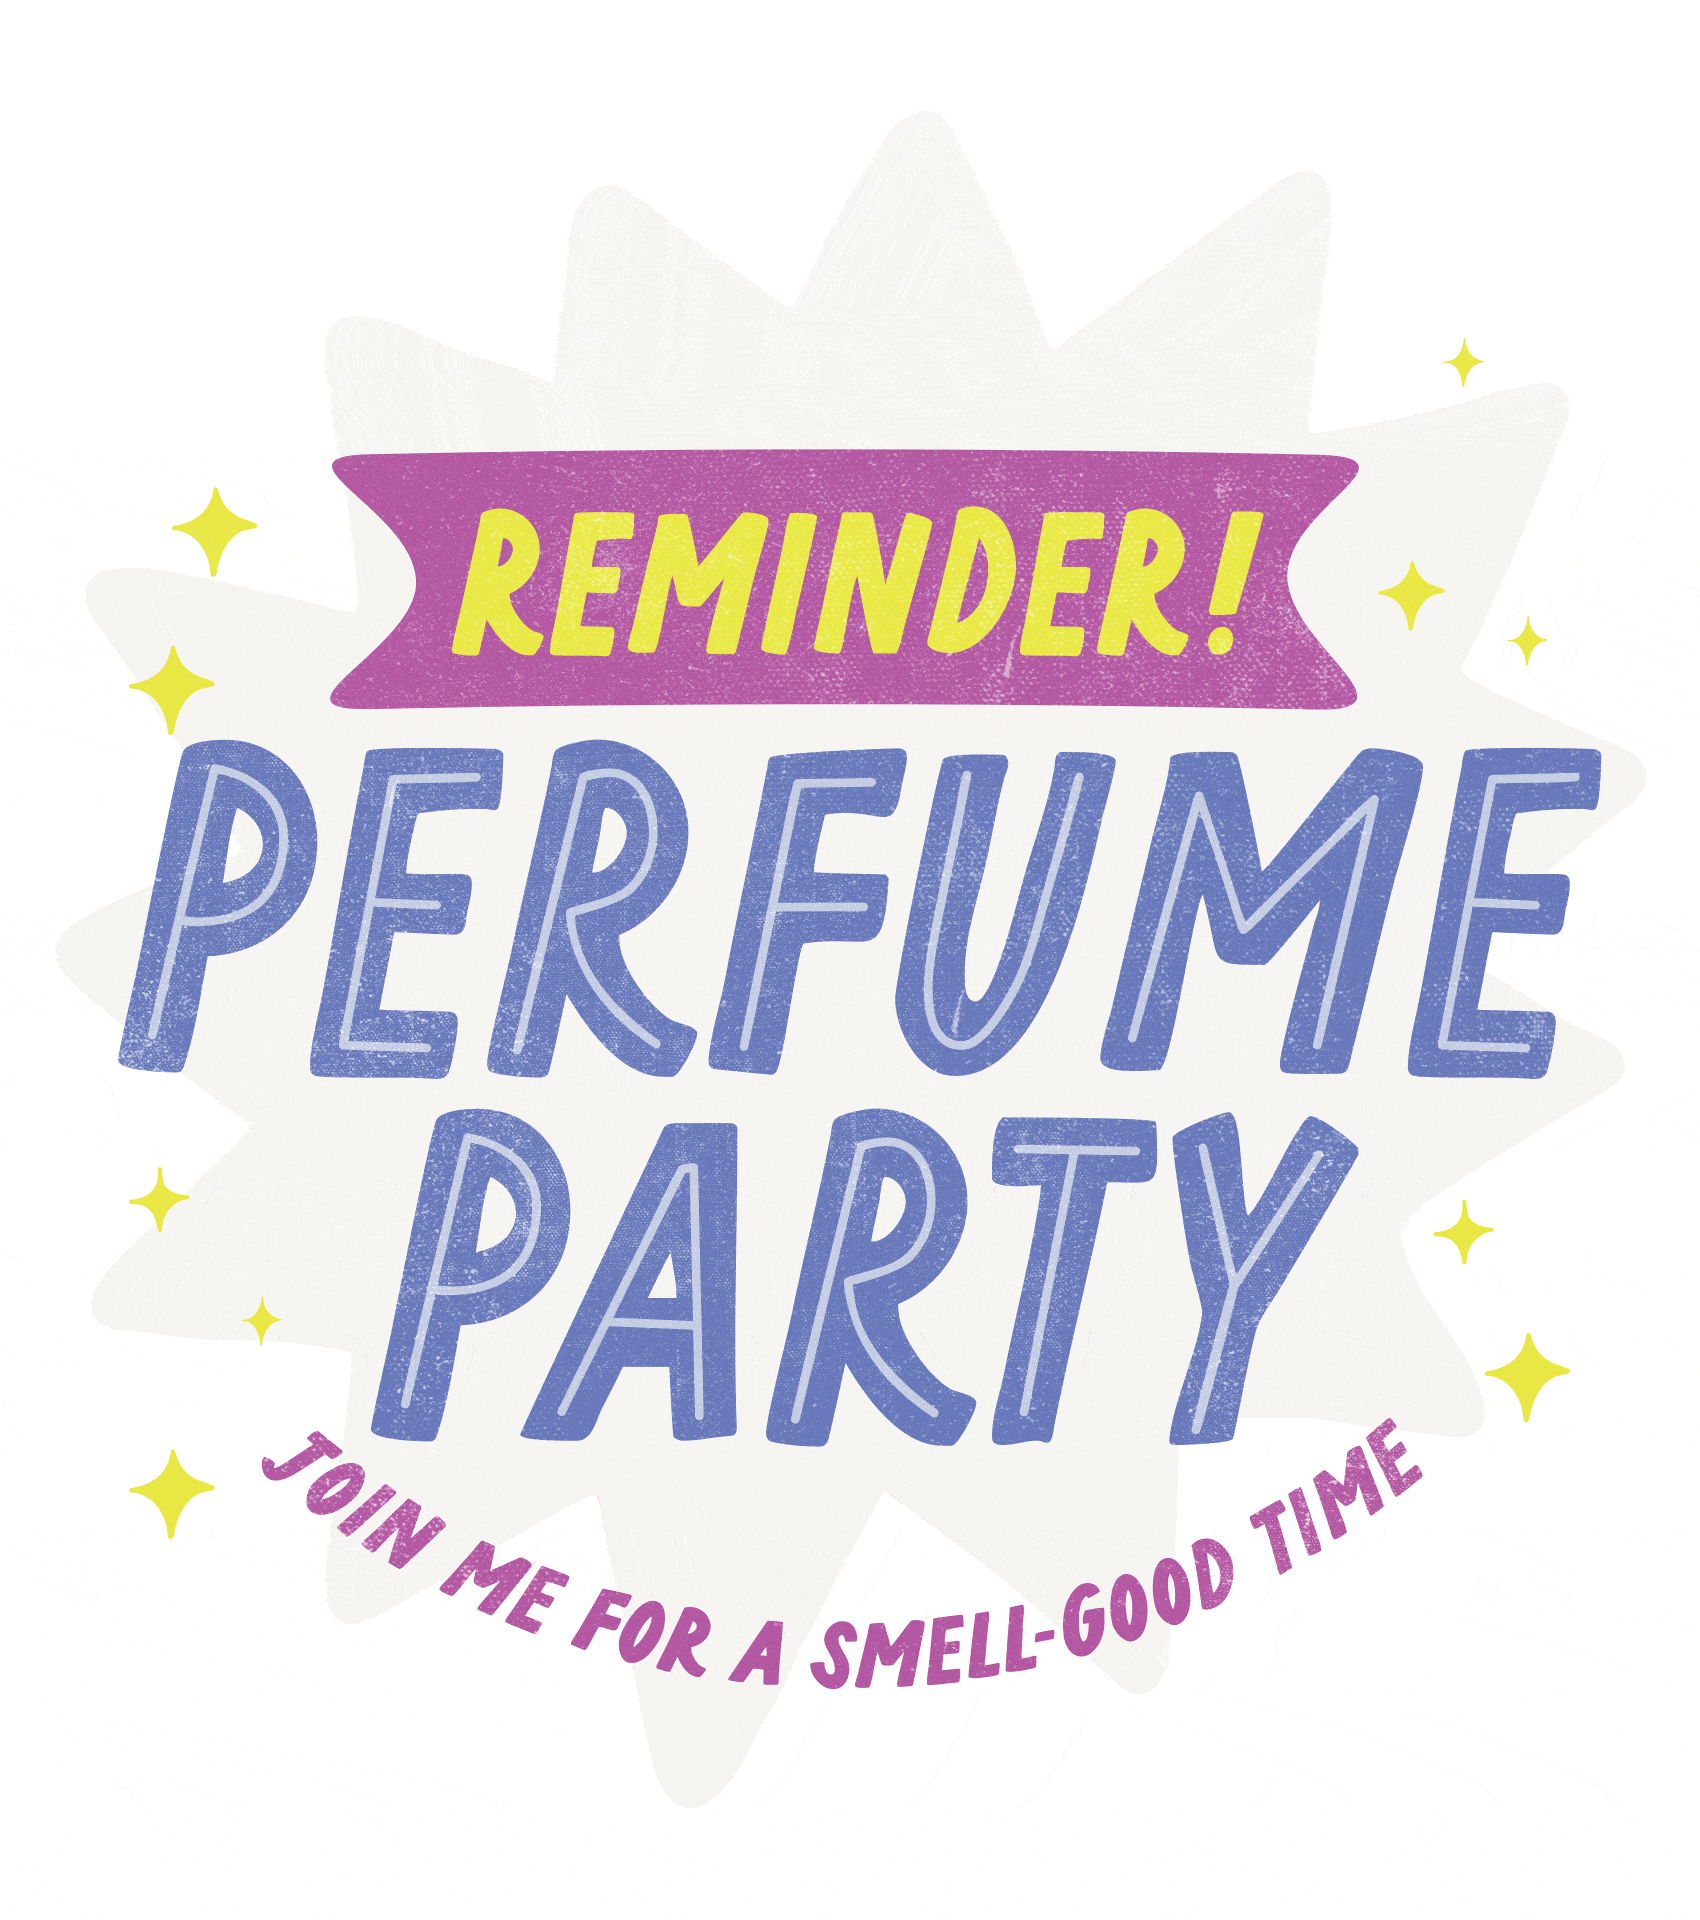 perfume party digital reminder with interactive elements